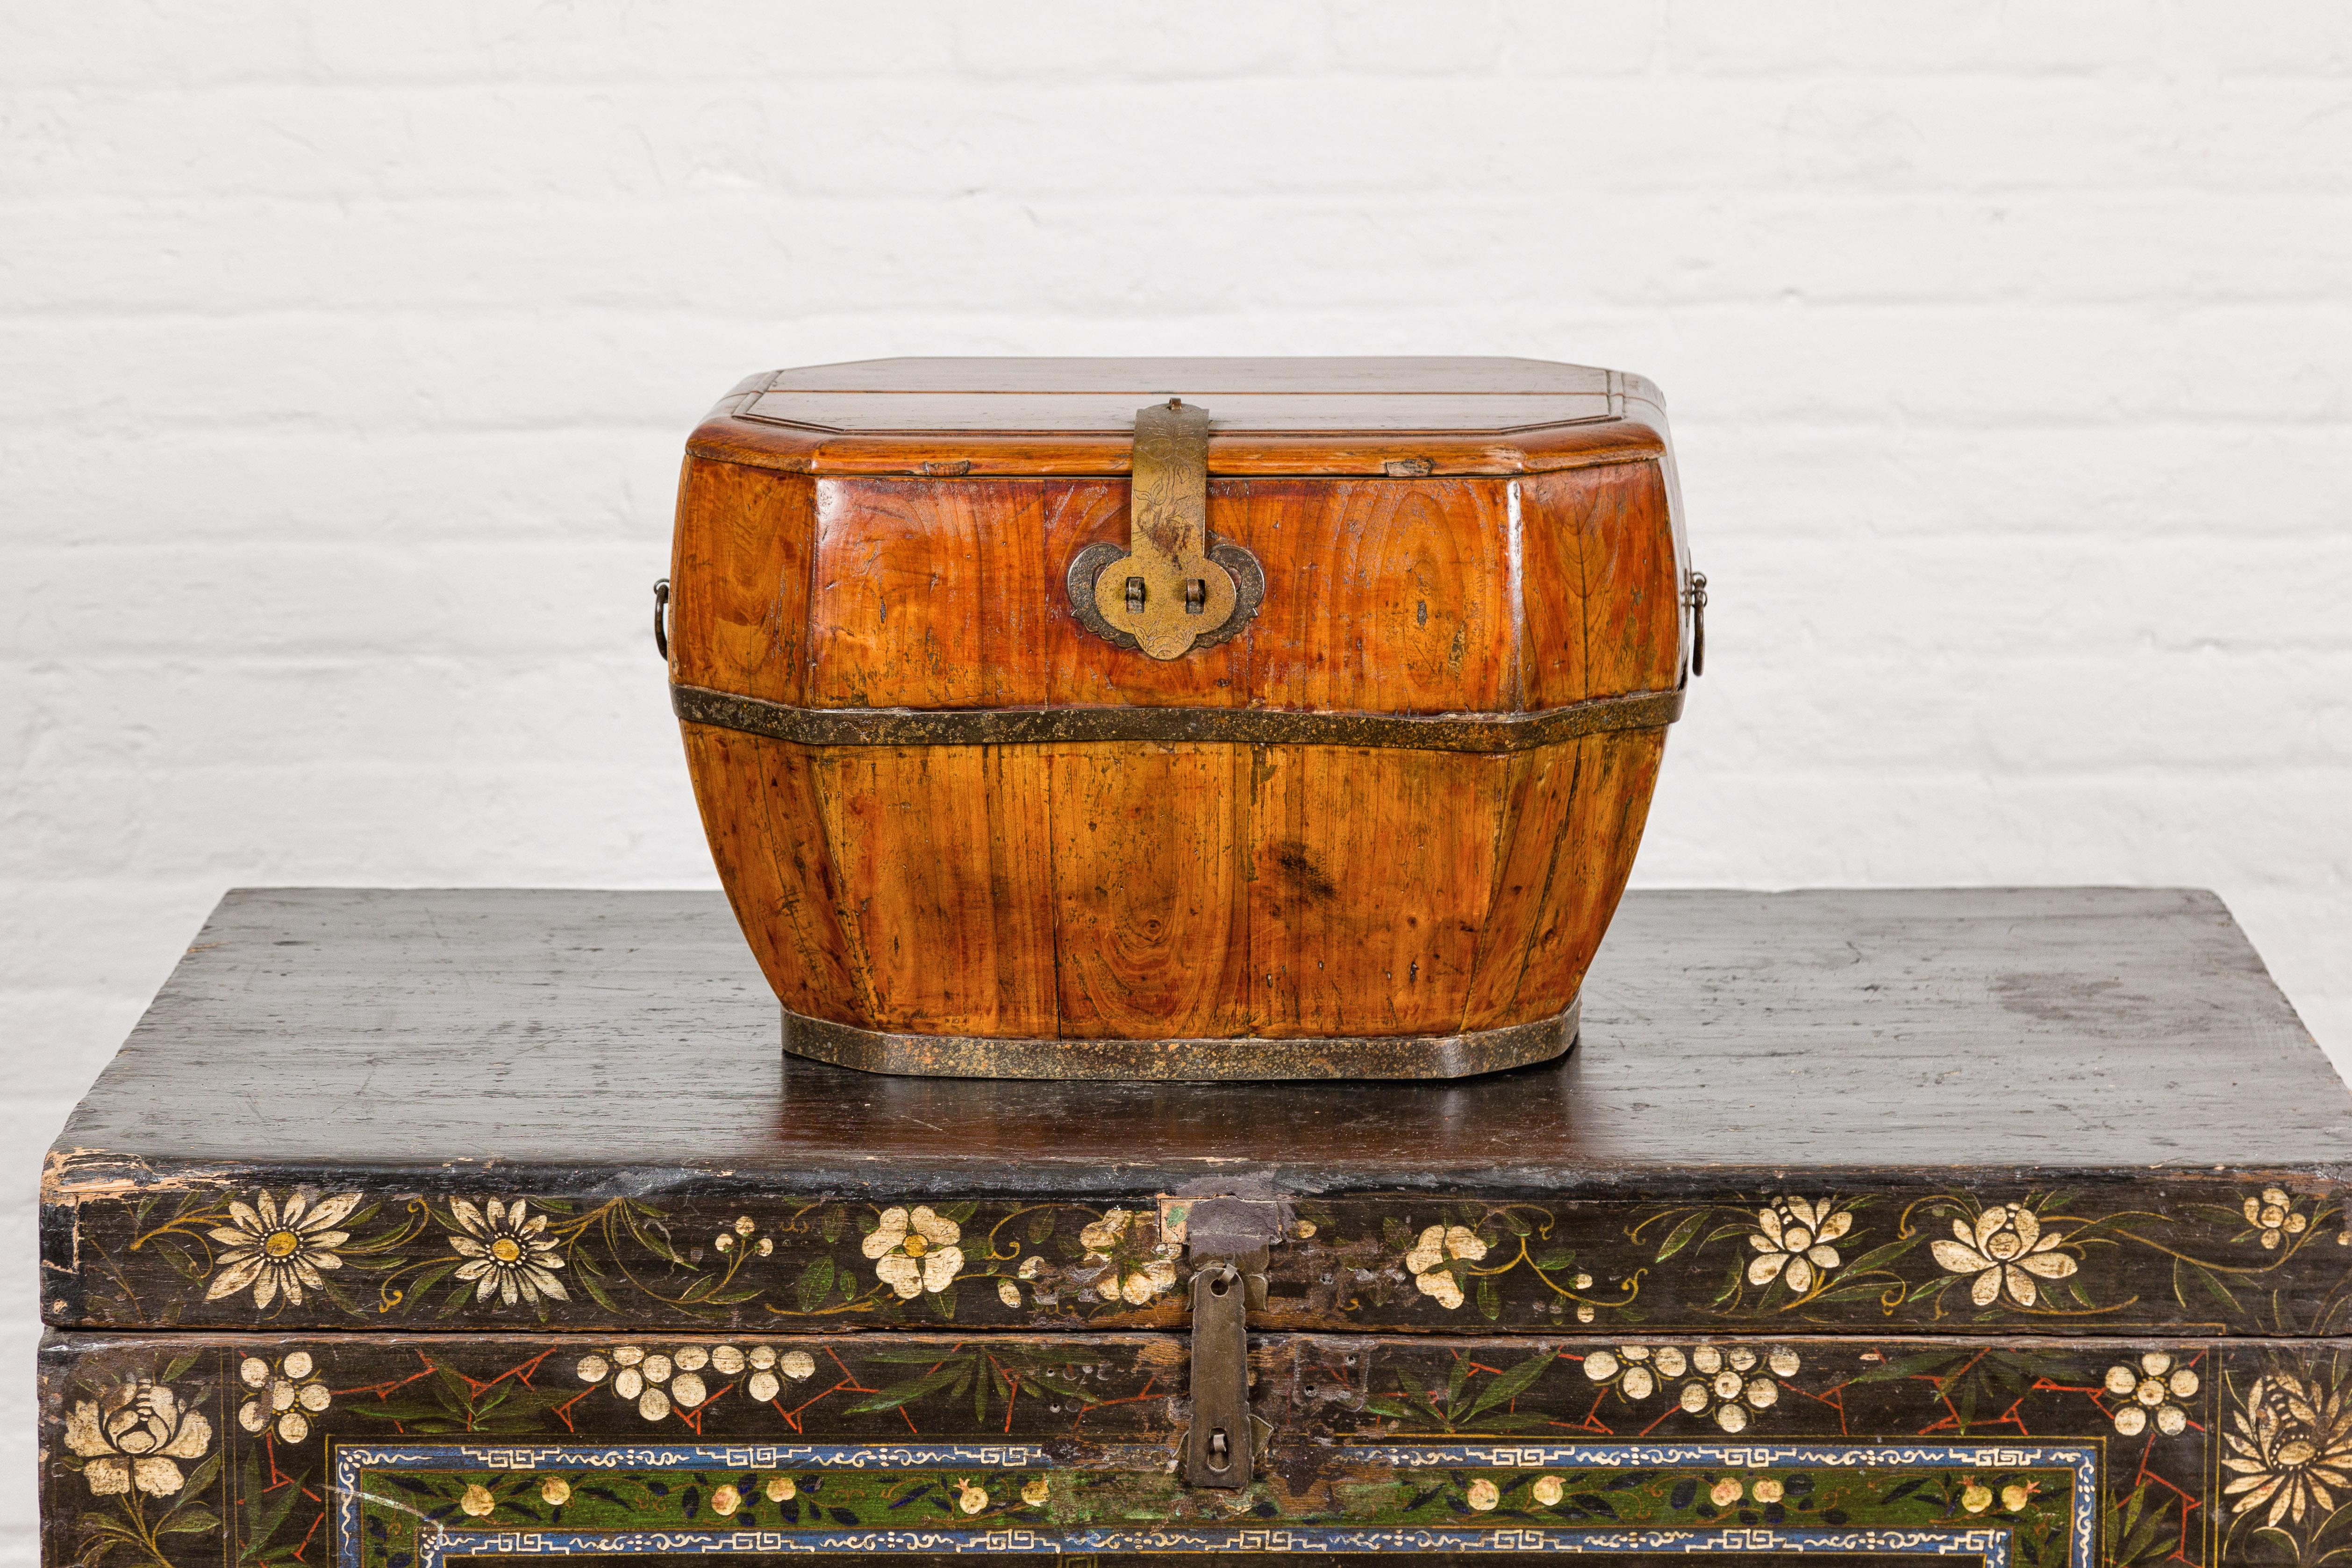 A Qing Dynasty period Chinese old box from the 19th century with traditional etched brass hardware, metal banding, partially removable top and light patina. Immerse yourself in the rich history of the Qing Dynasty with this exquisite 19th-century